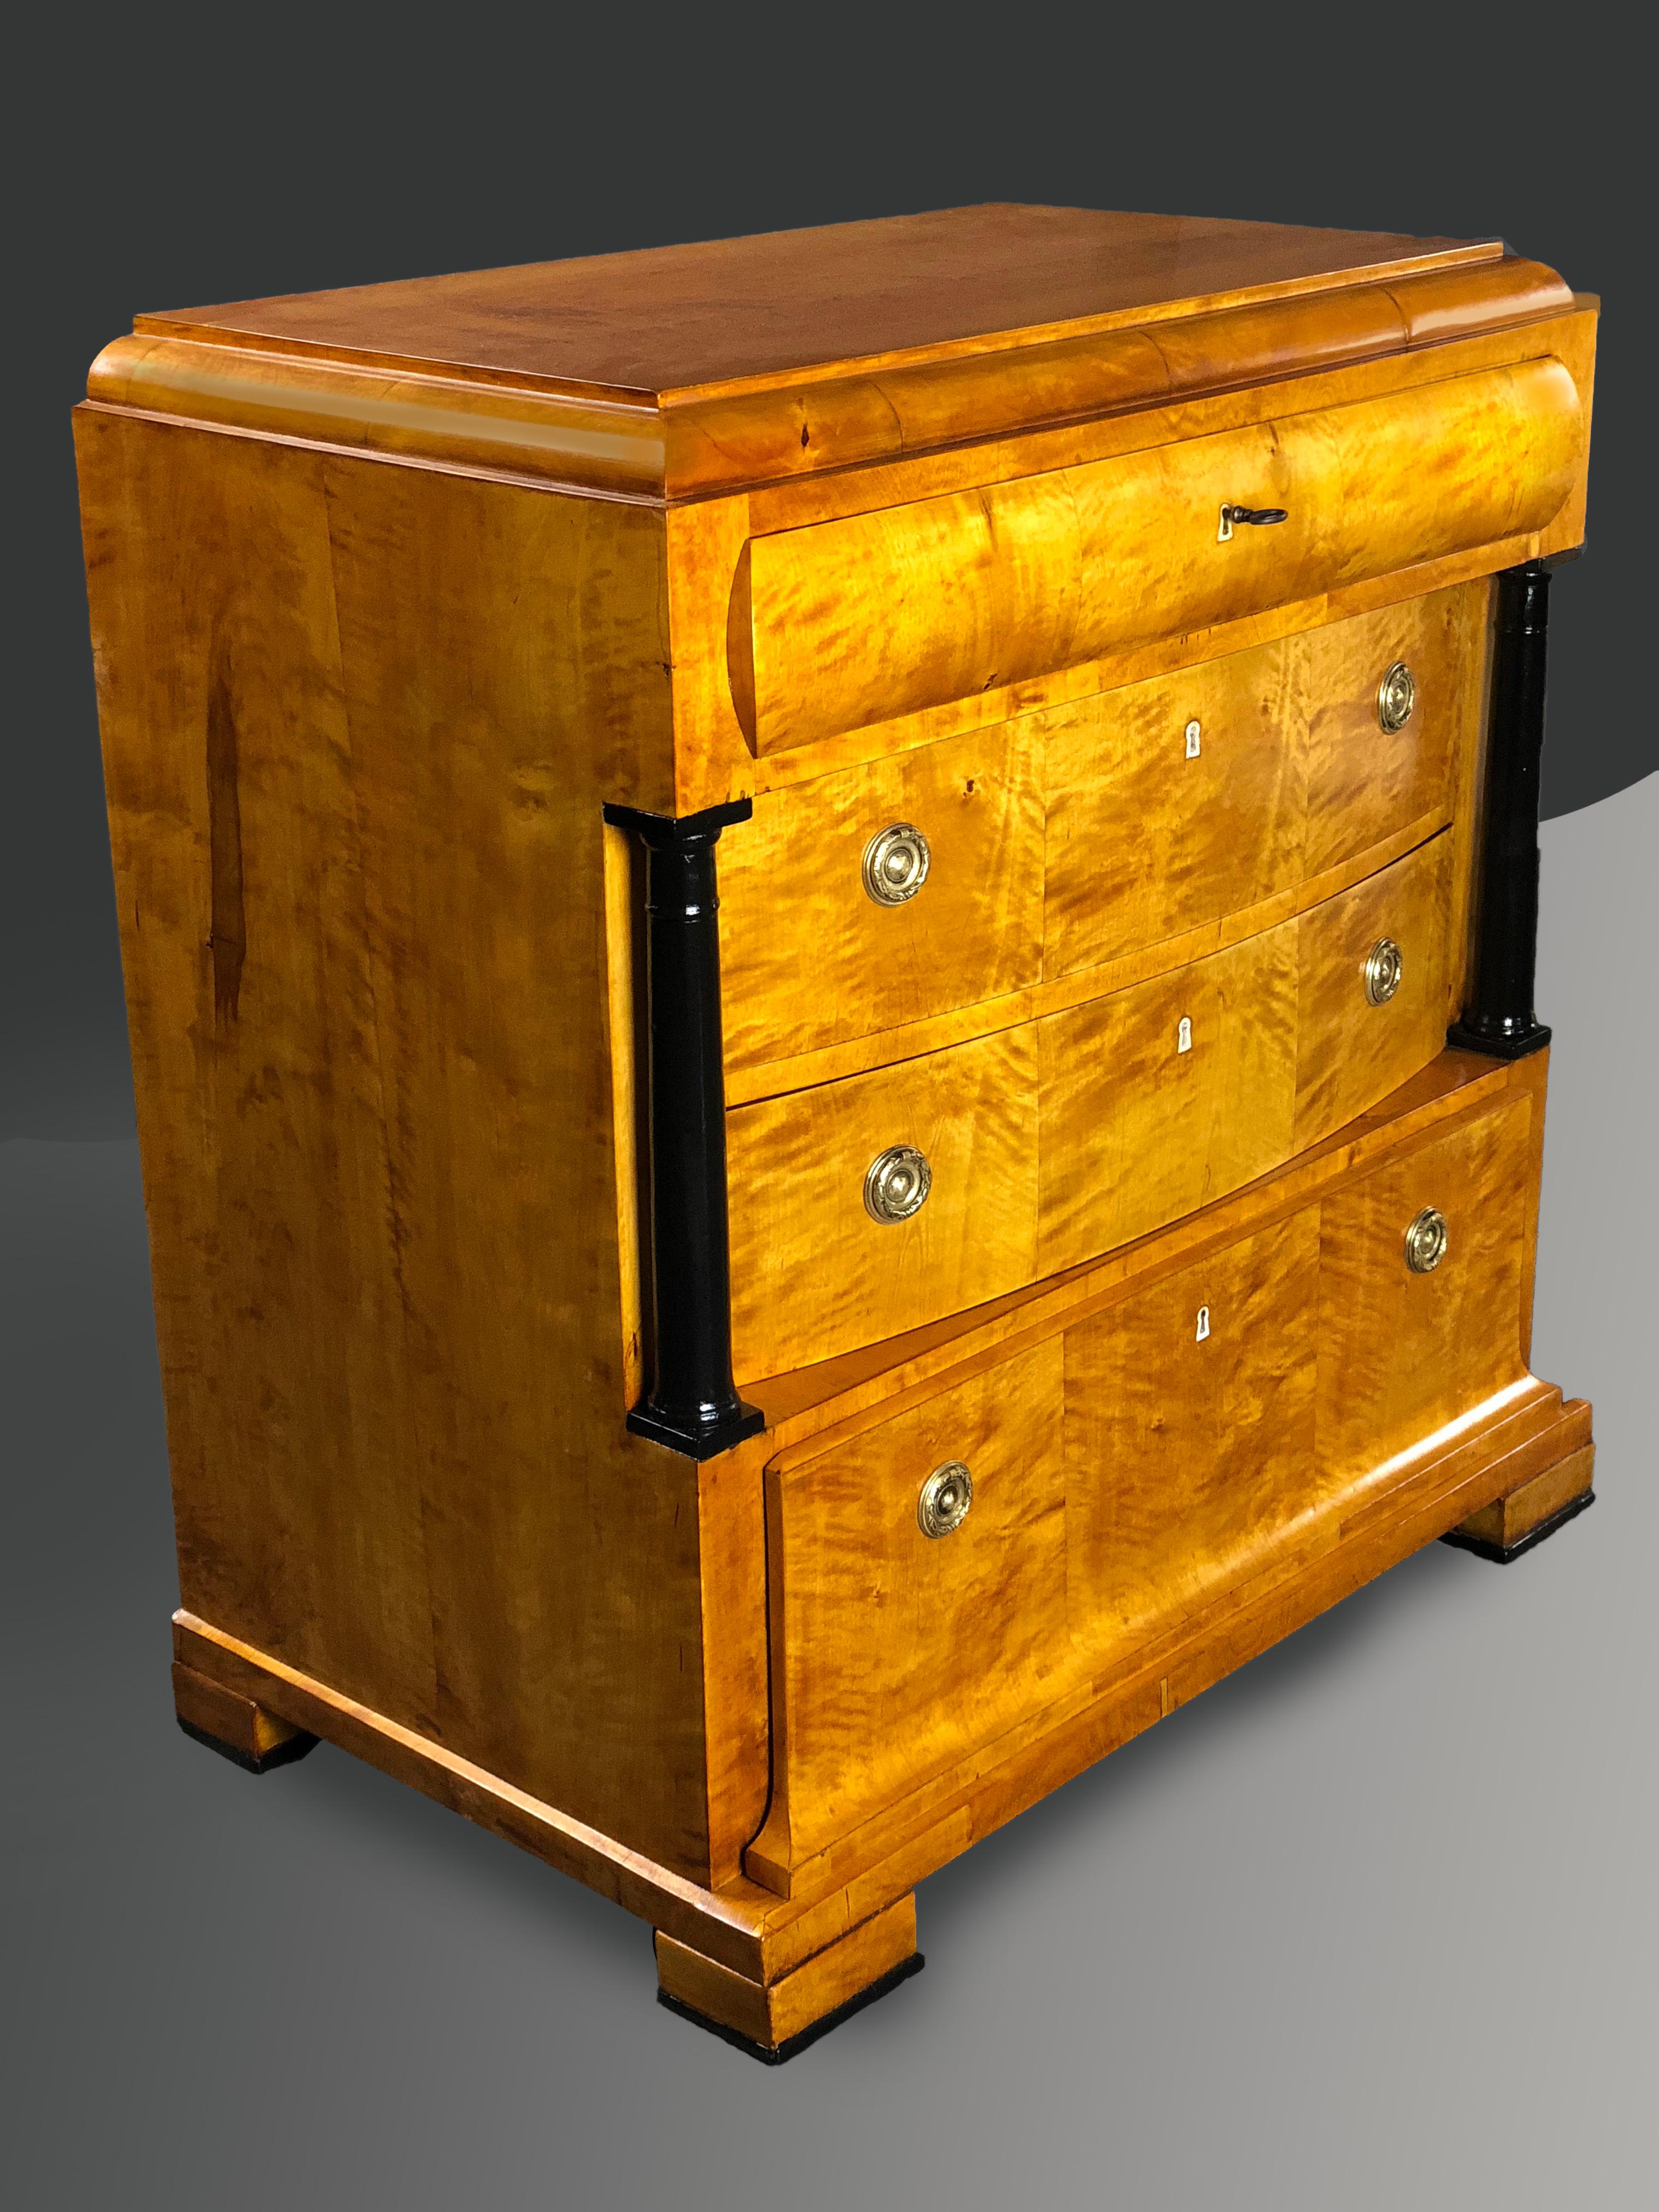 Outstanding Biedermeier late 19th century German finely figured satin birch commode of complex architectural design, the top border ending in curved moulding, the top drawer also having a moulded front, its interior with three divisions. The two bow